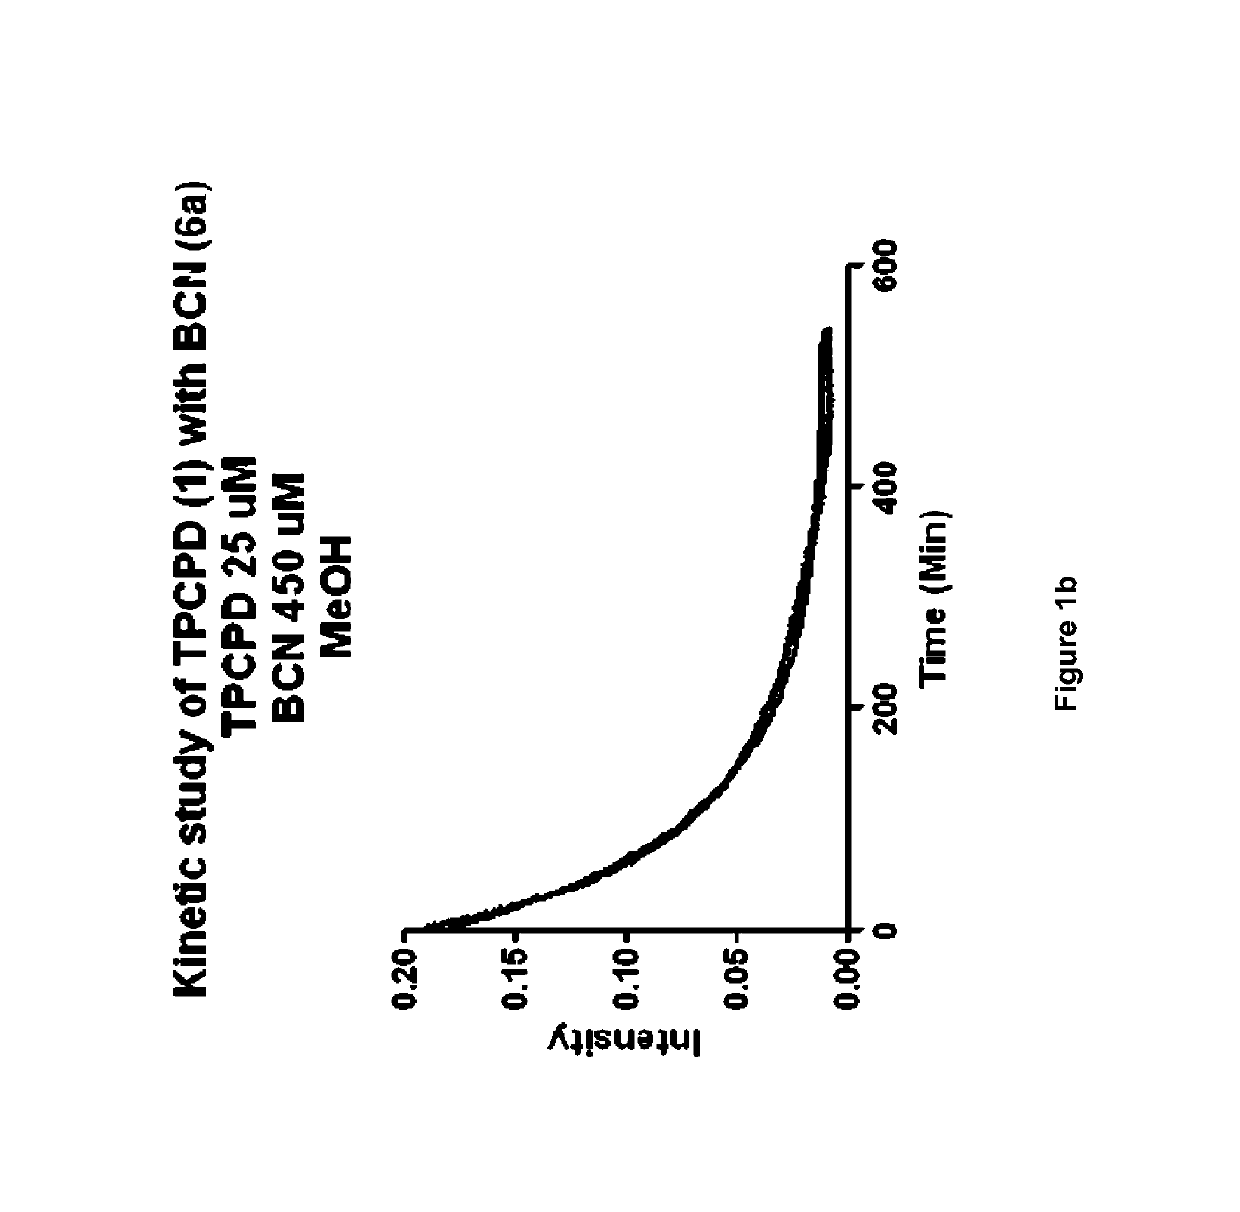 Carbon monoxide-releasing molecules for therapeutic applications and methods of making and using thereof